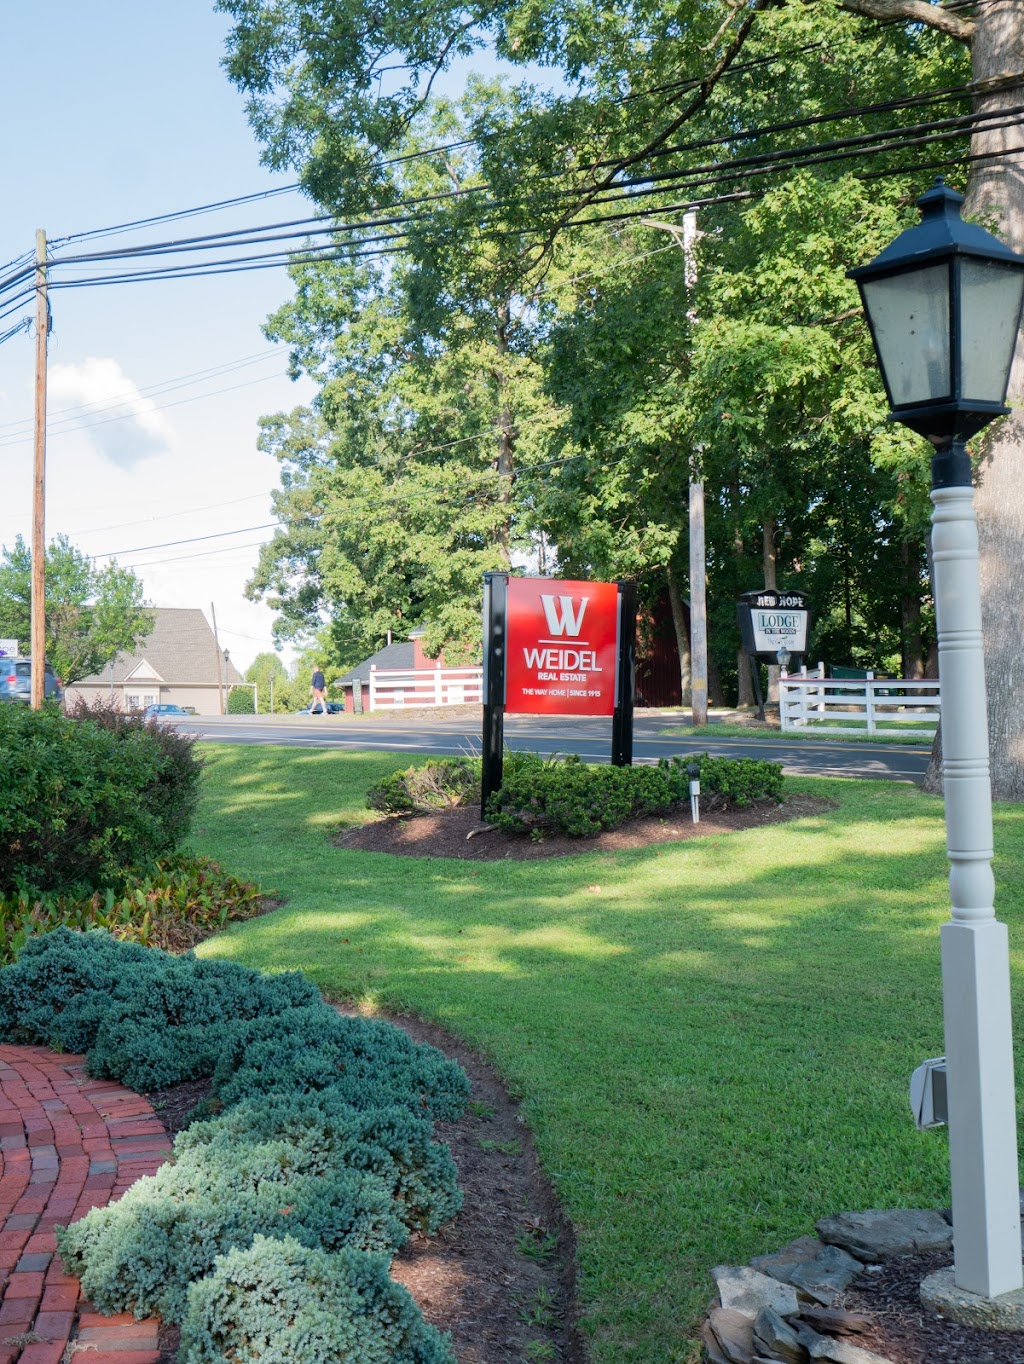 Weidel Real Estate - New Hope | 403 York Rd, New Hope, PA 18938 | Phone: (215) 862-9441